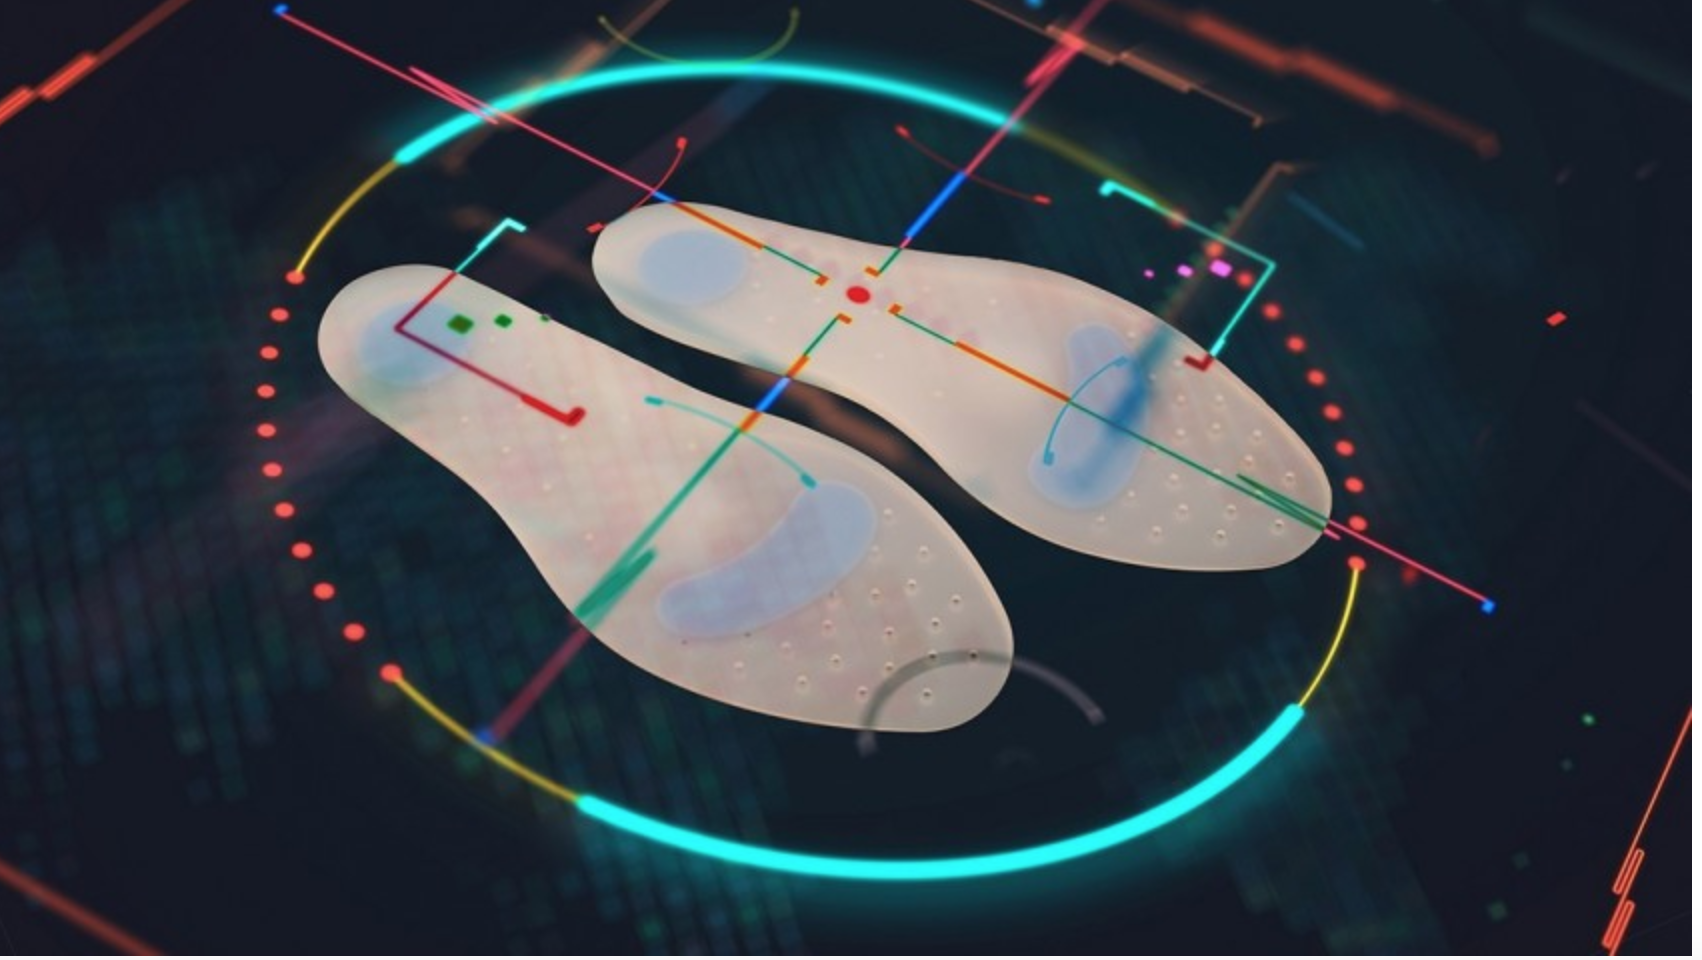 Smart insole developed at Stevens Institute of Technology